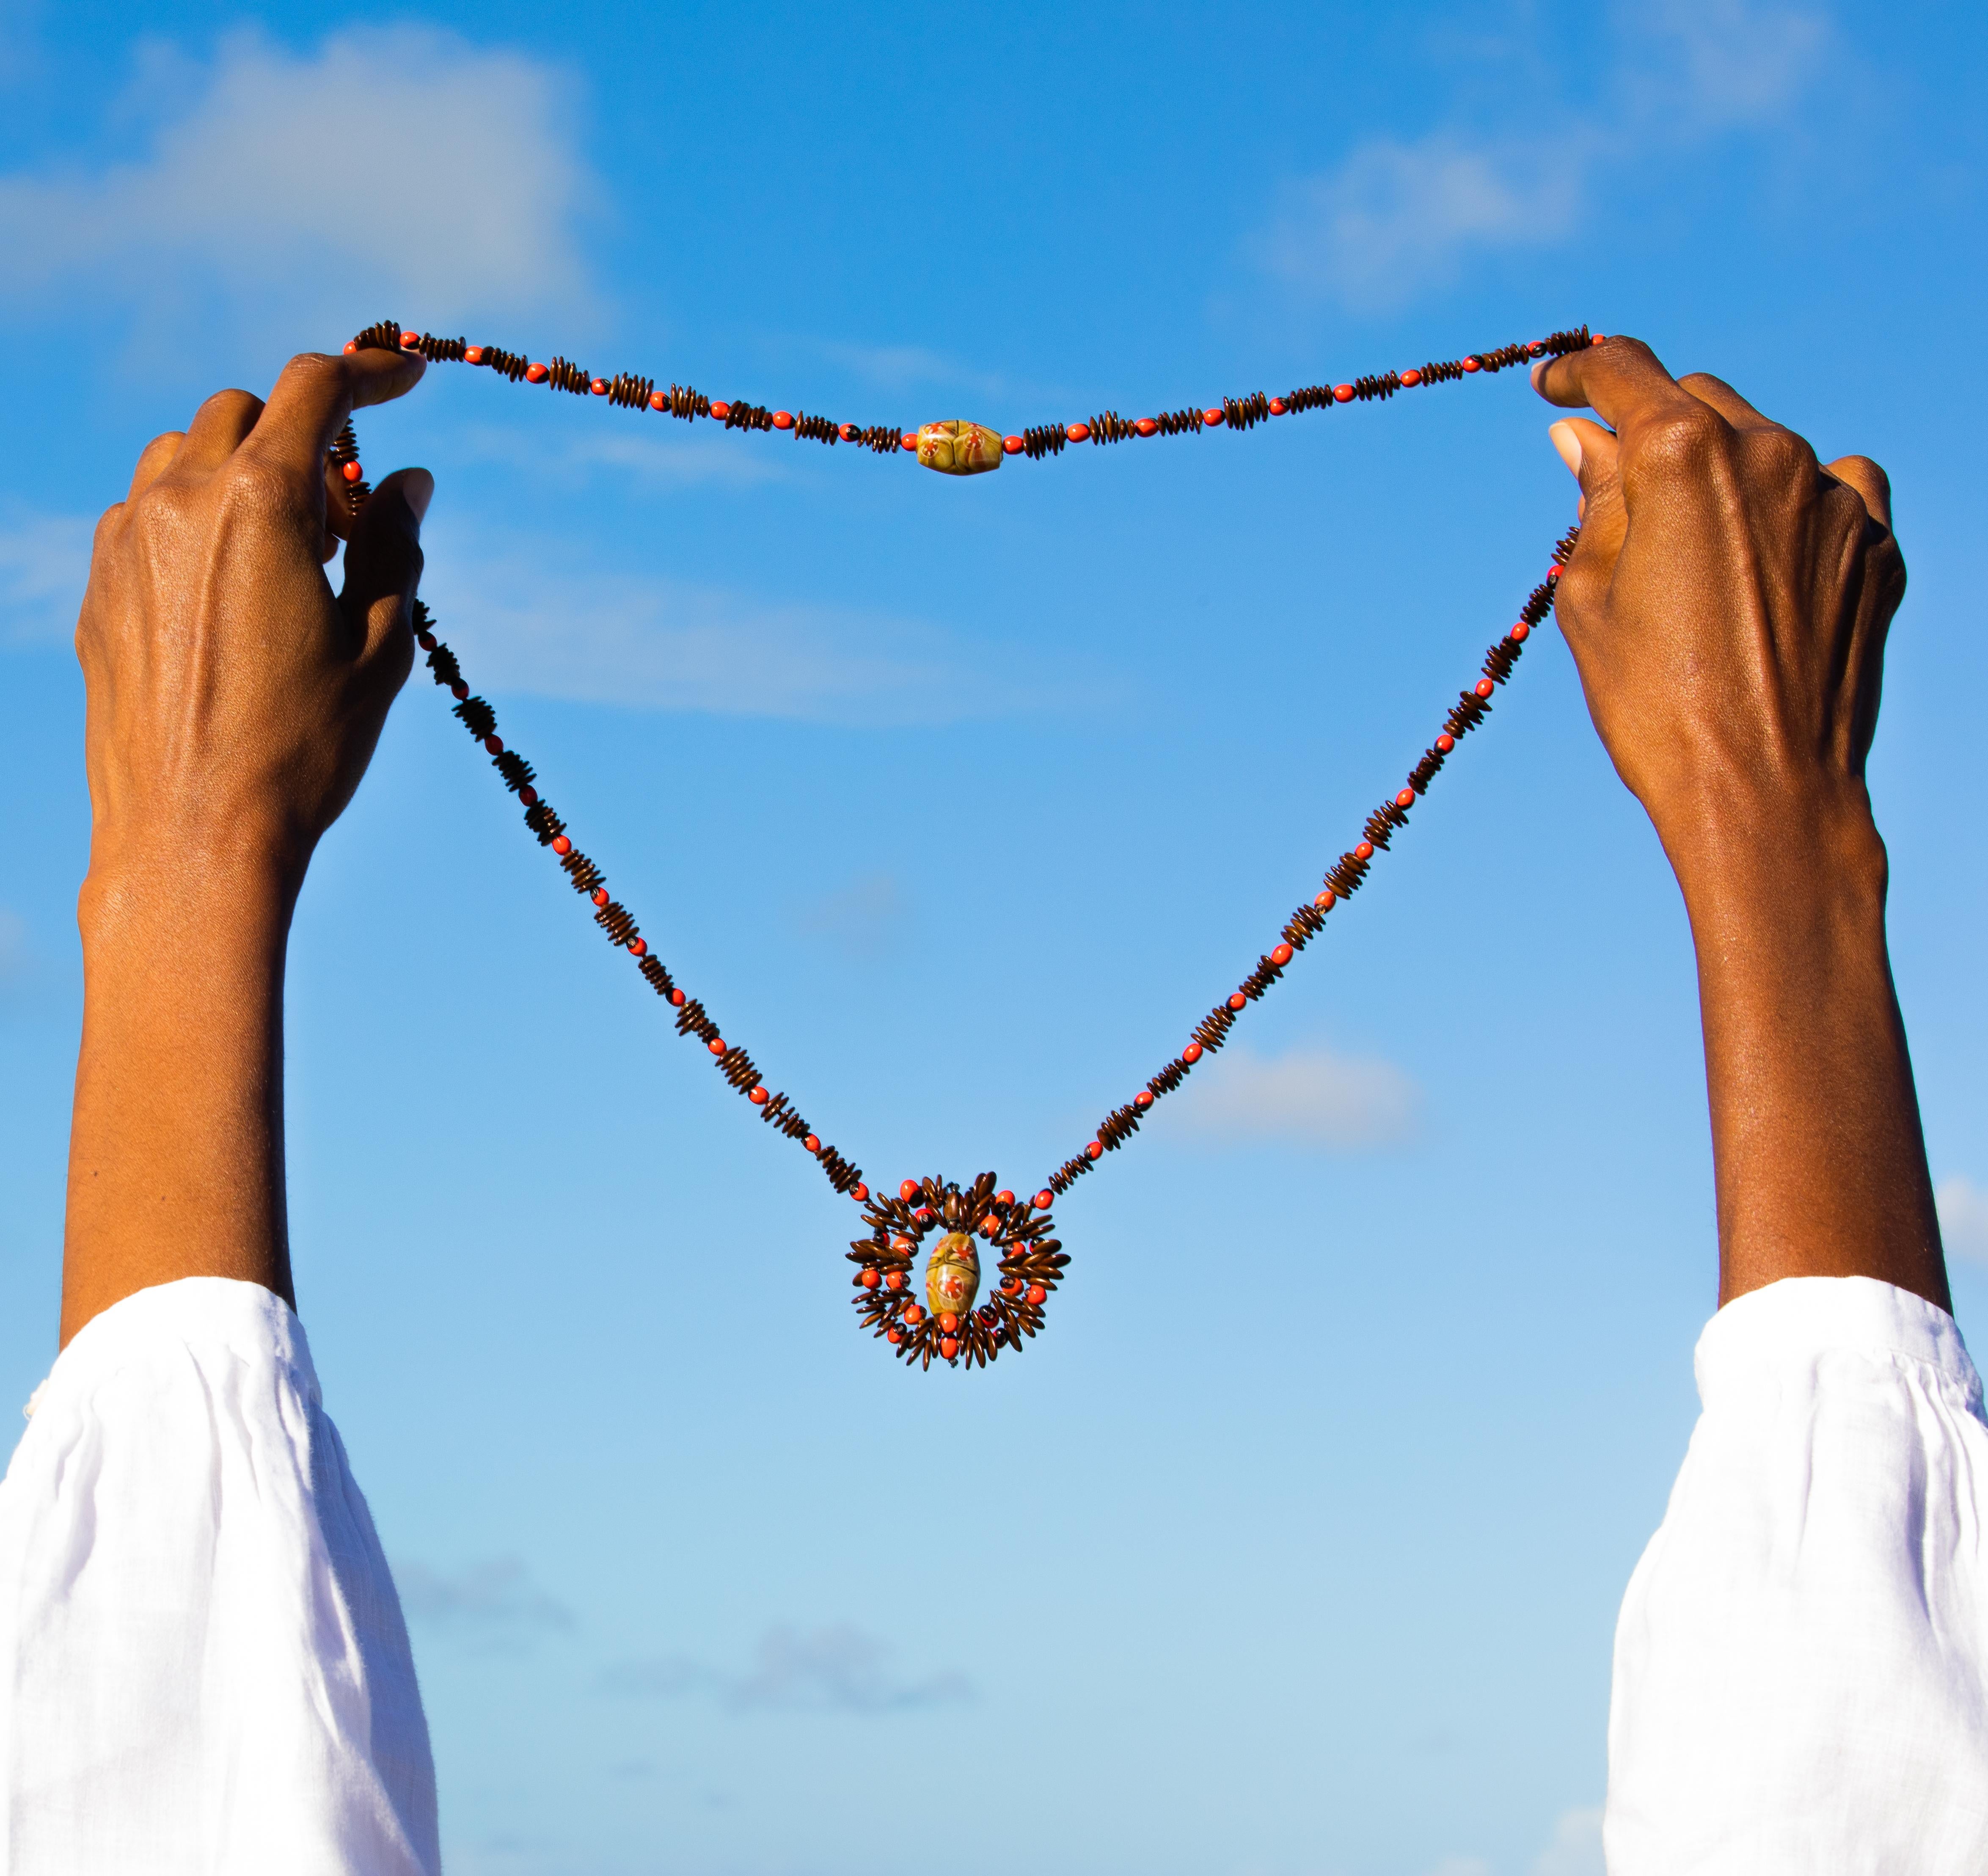 We pay tribute to our mother country by featuring our designer piece, The Best of Both Worlds.
Combining our traditional Antiguan Caribbeads with African glass beads, we honor our roots in this elegant necklace. The gentle swirling greens and reds